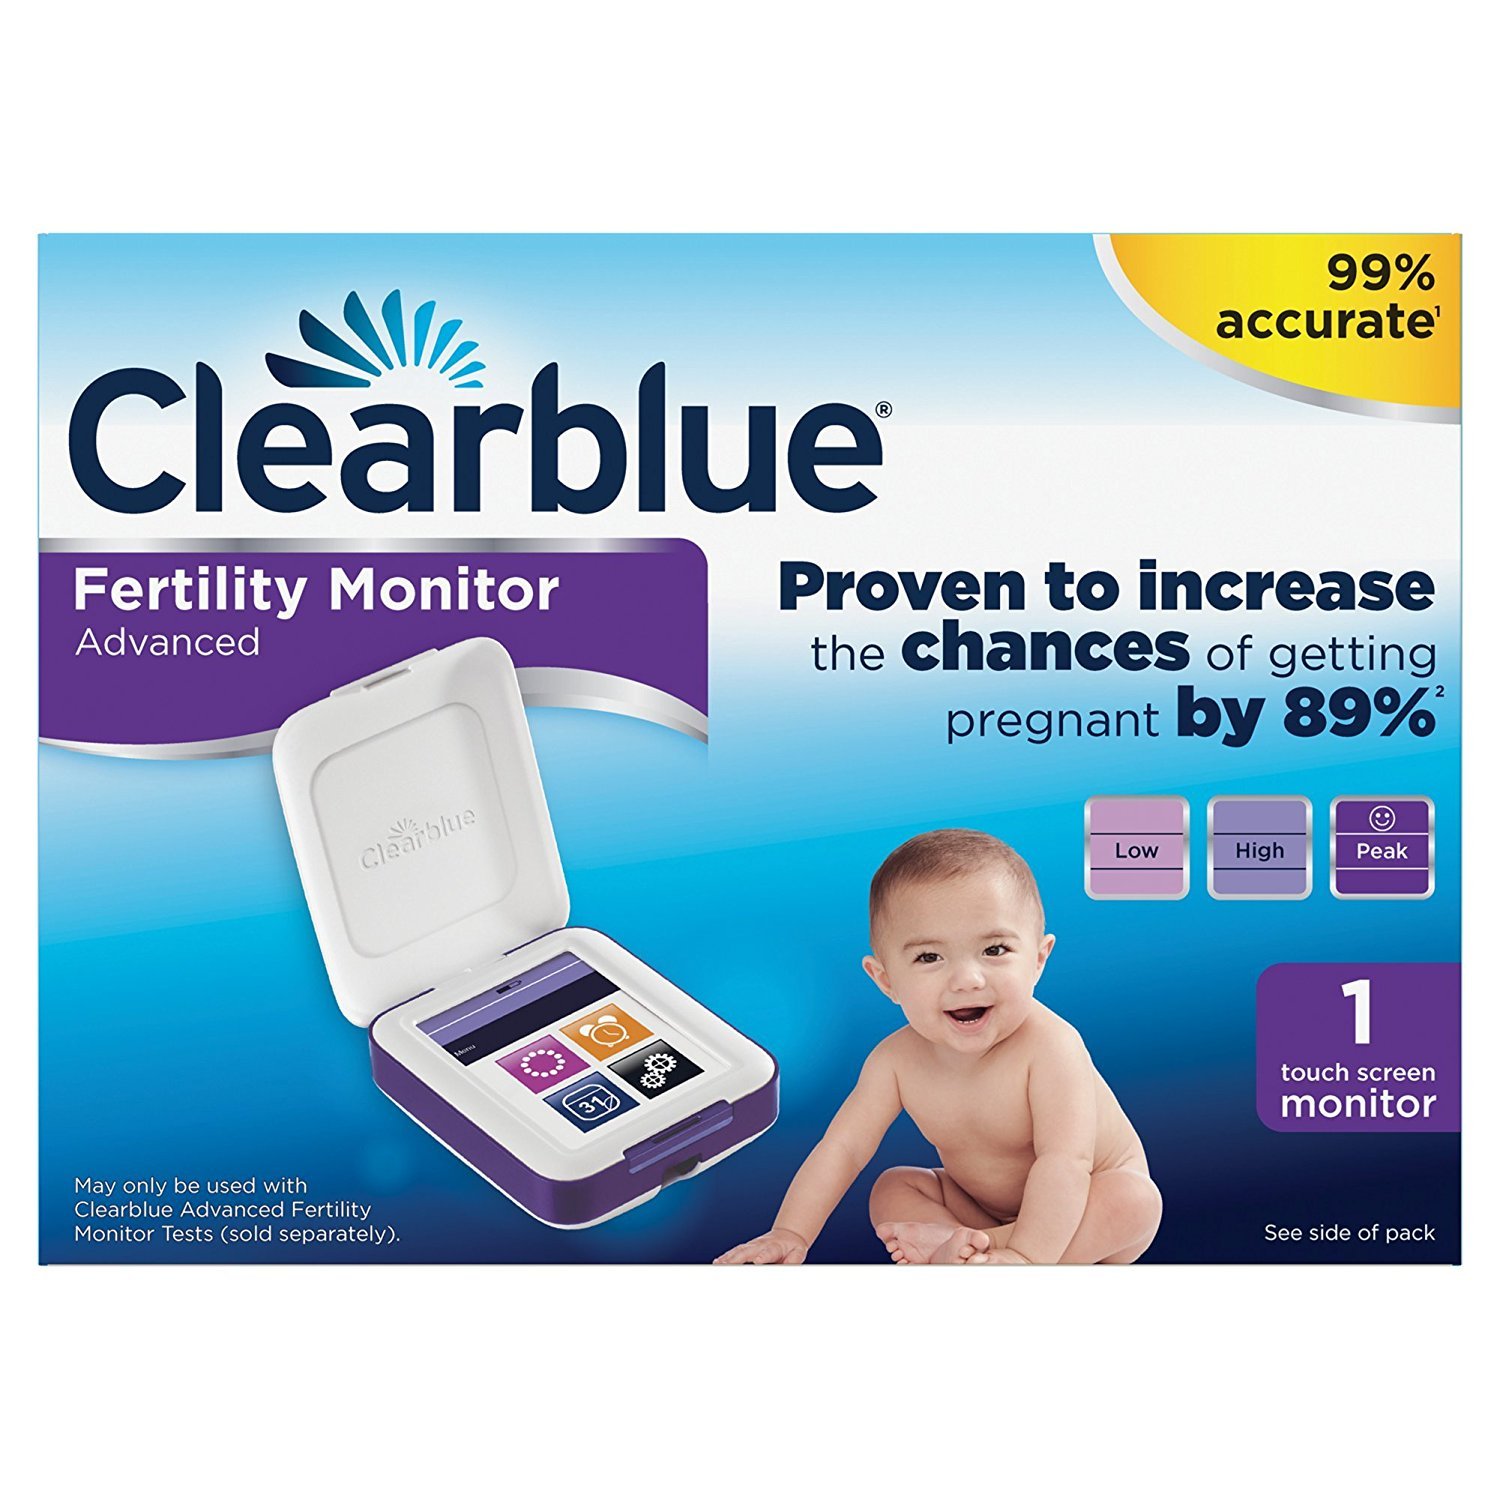 Clearblue advanced